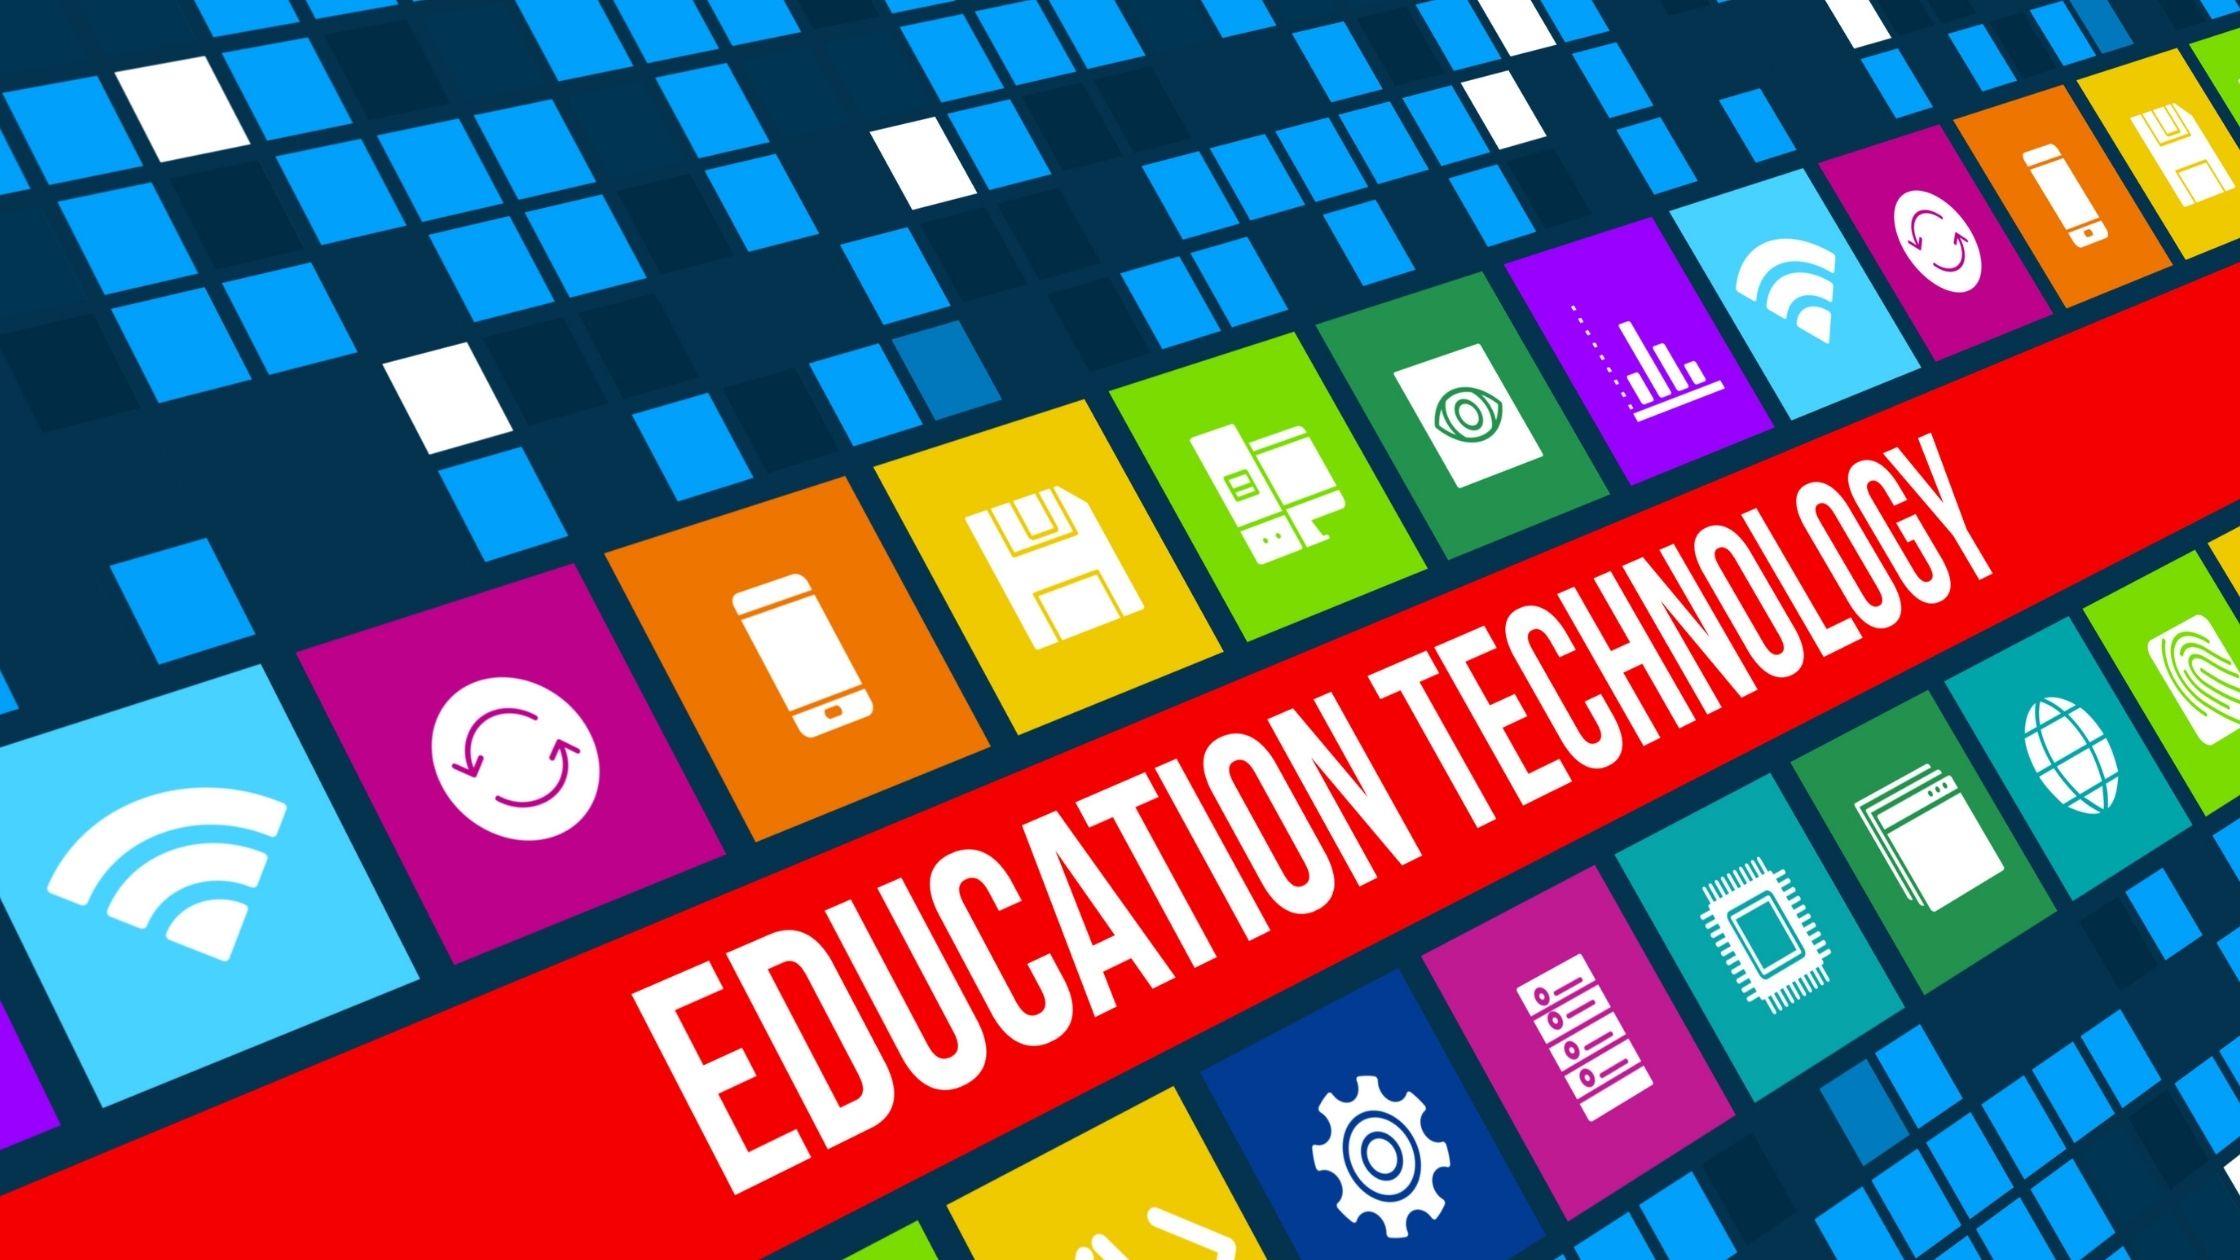 technology in education next 10 years